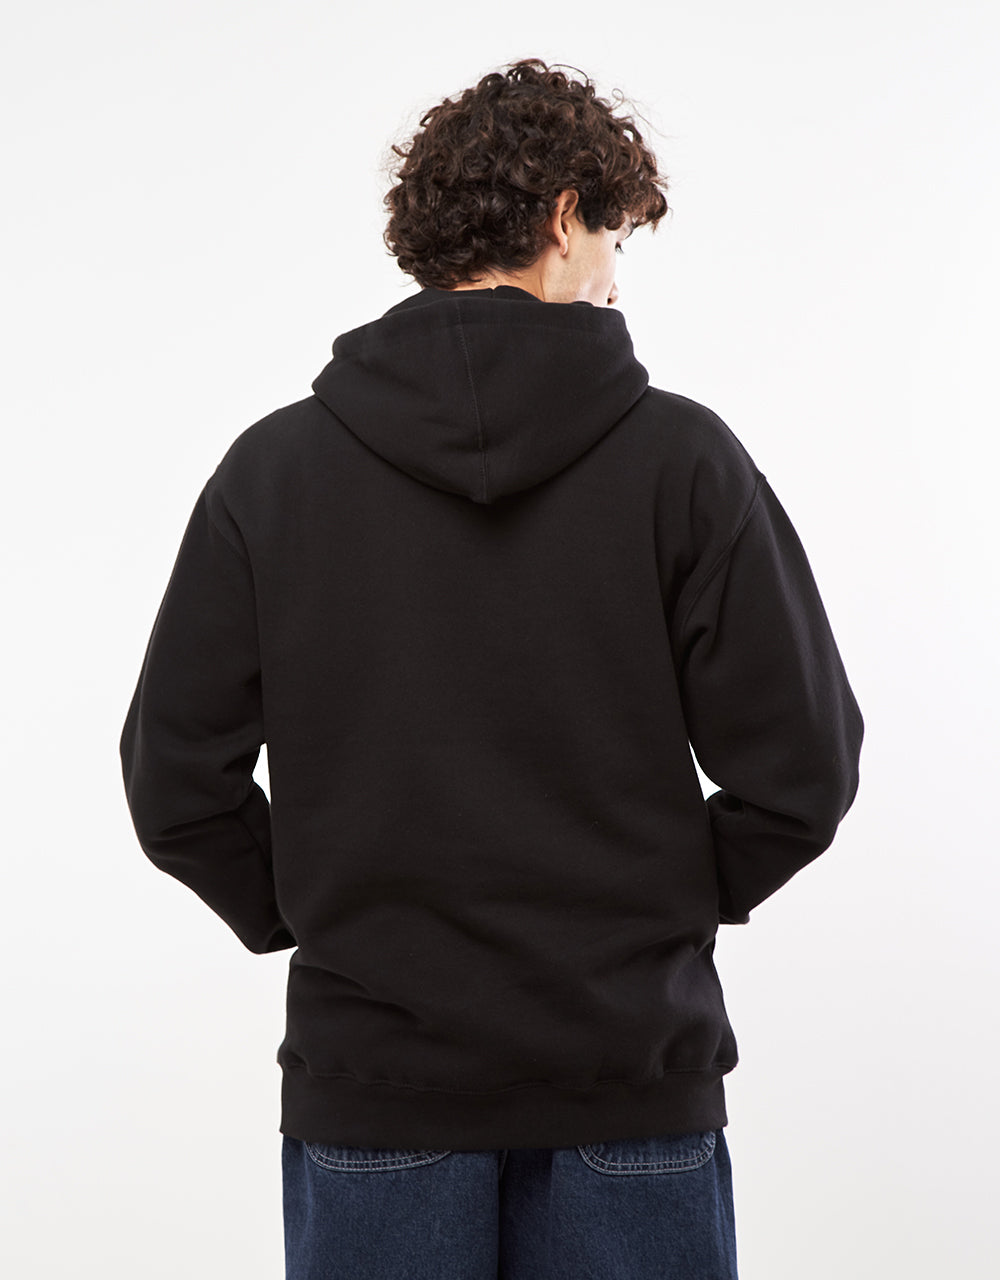 Glue A Place For You Pullover Hoodie - Black